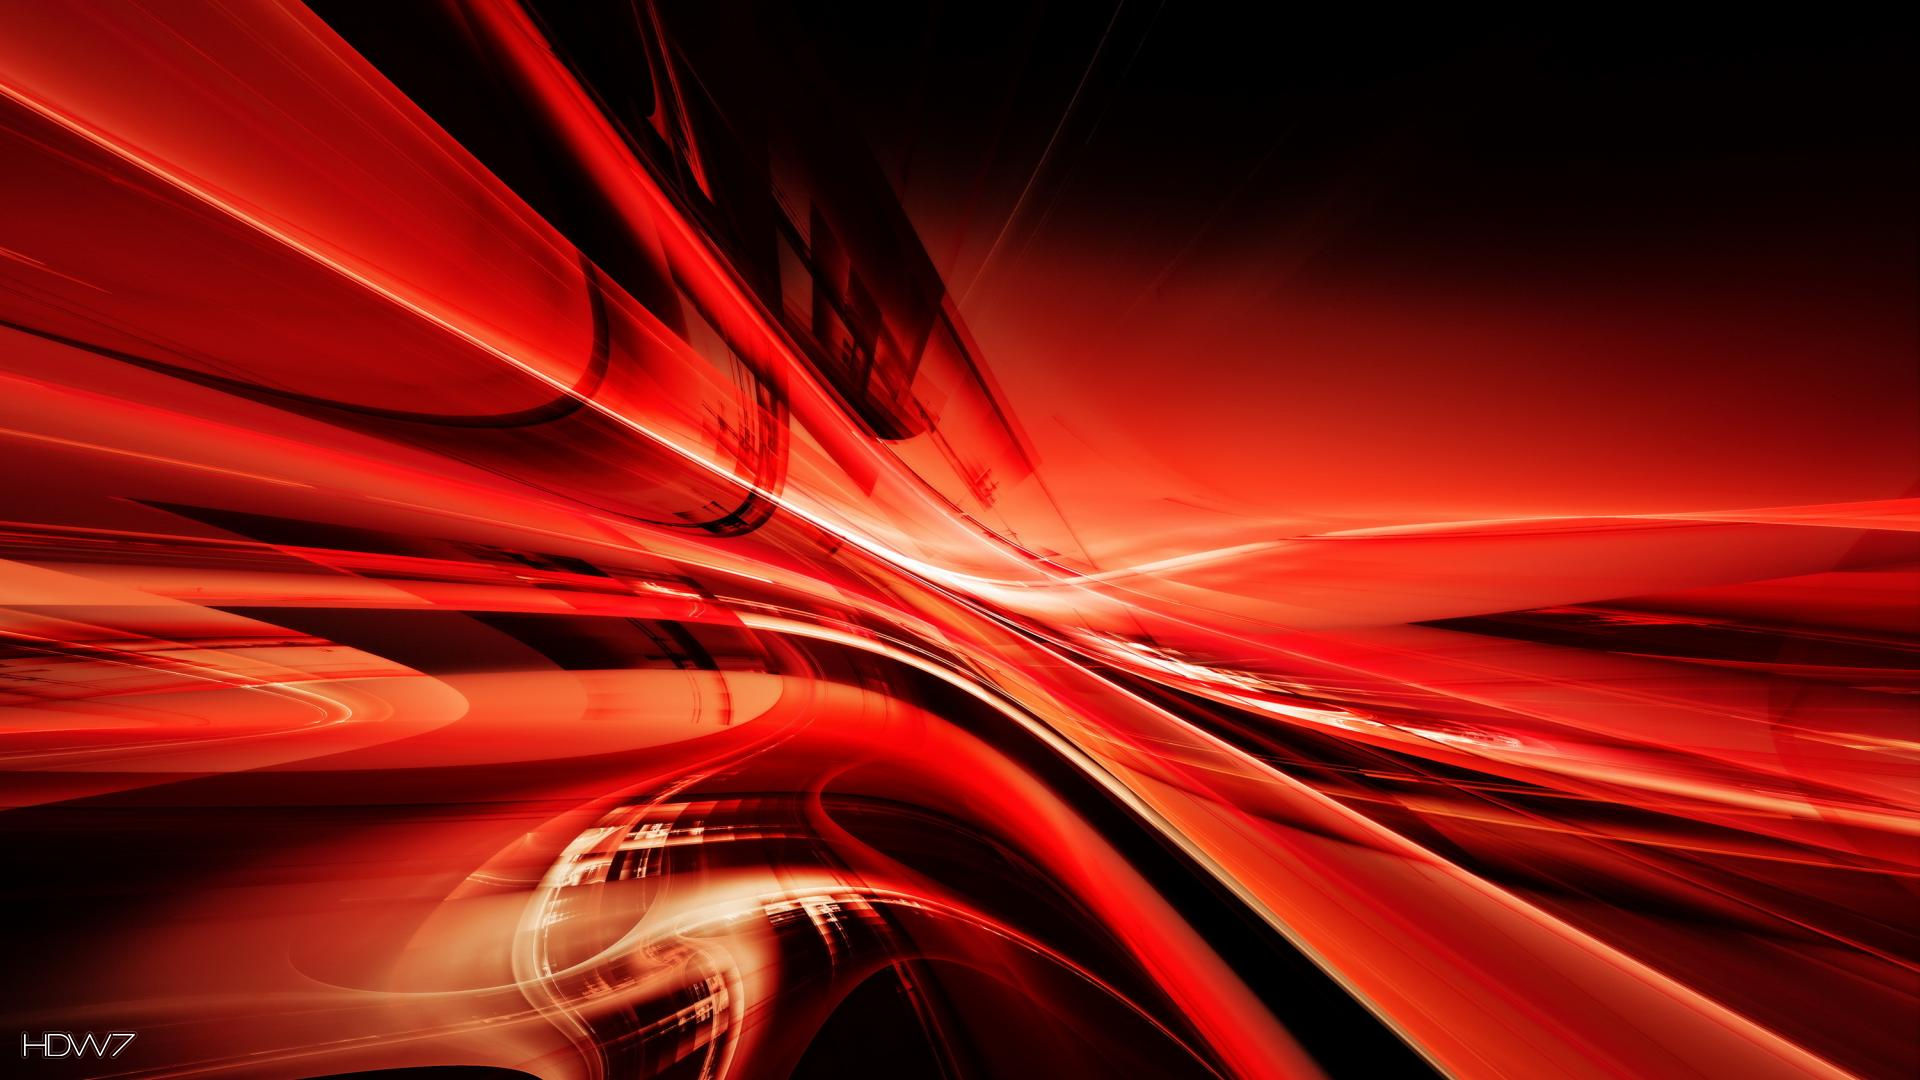 Red Line Pattern Abstract 1080p HD Wallpaper Gallery